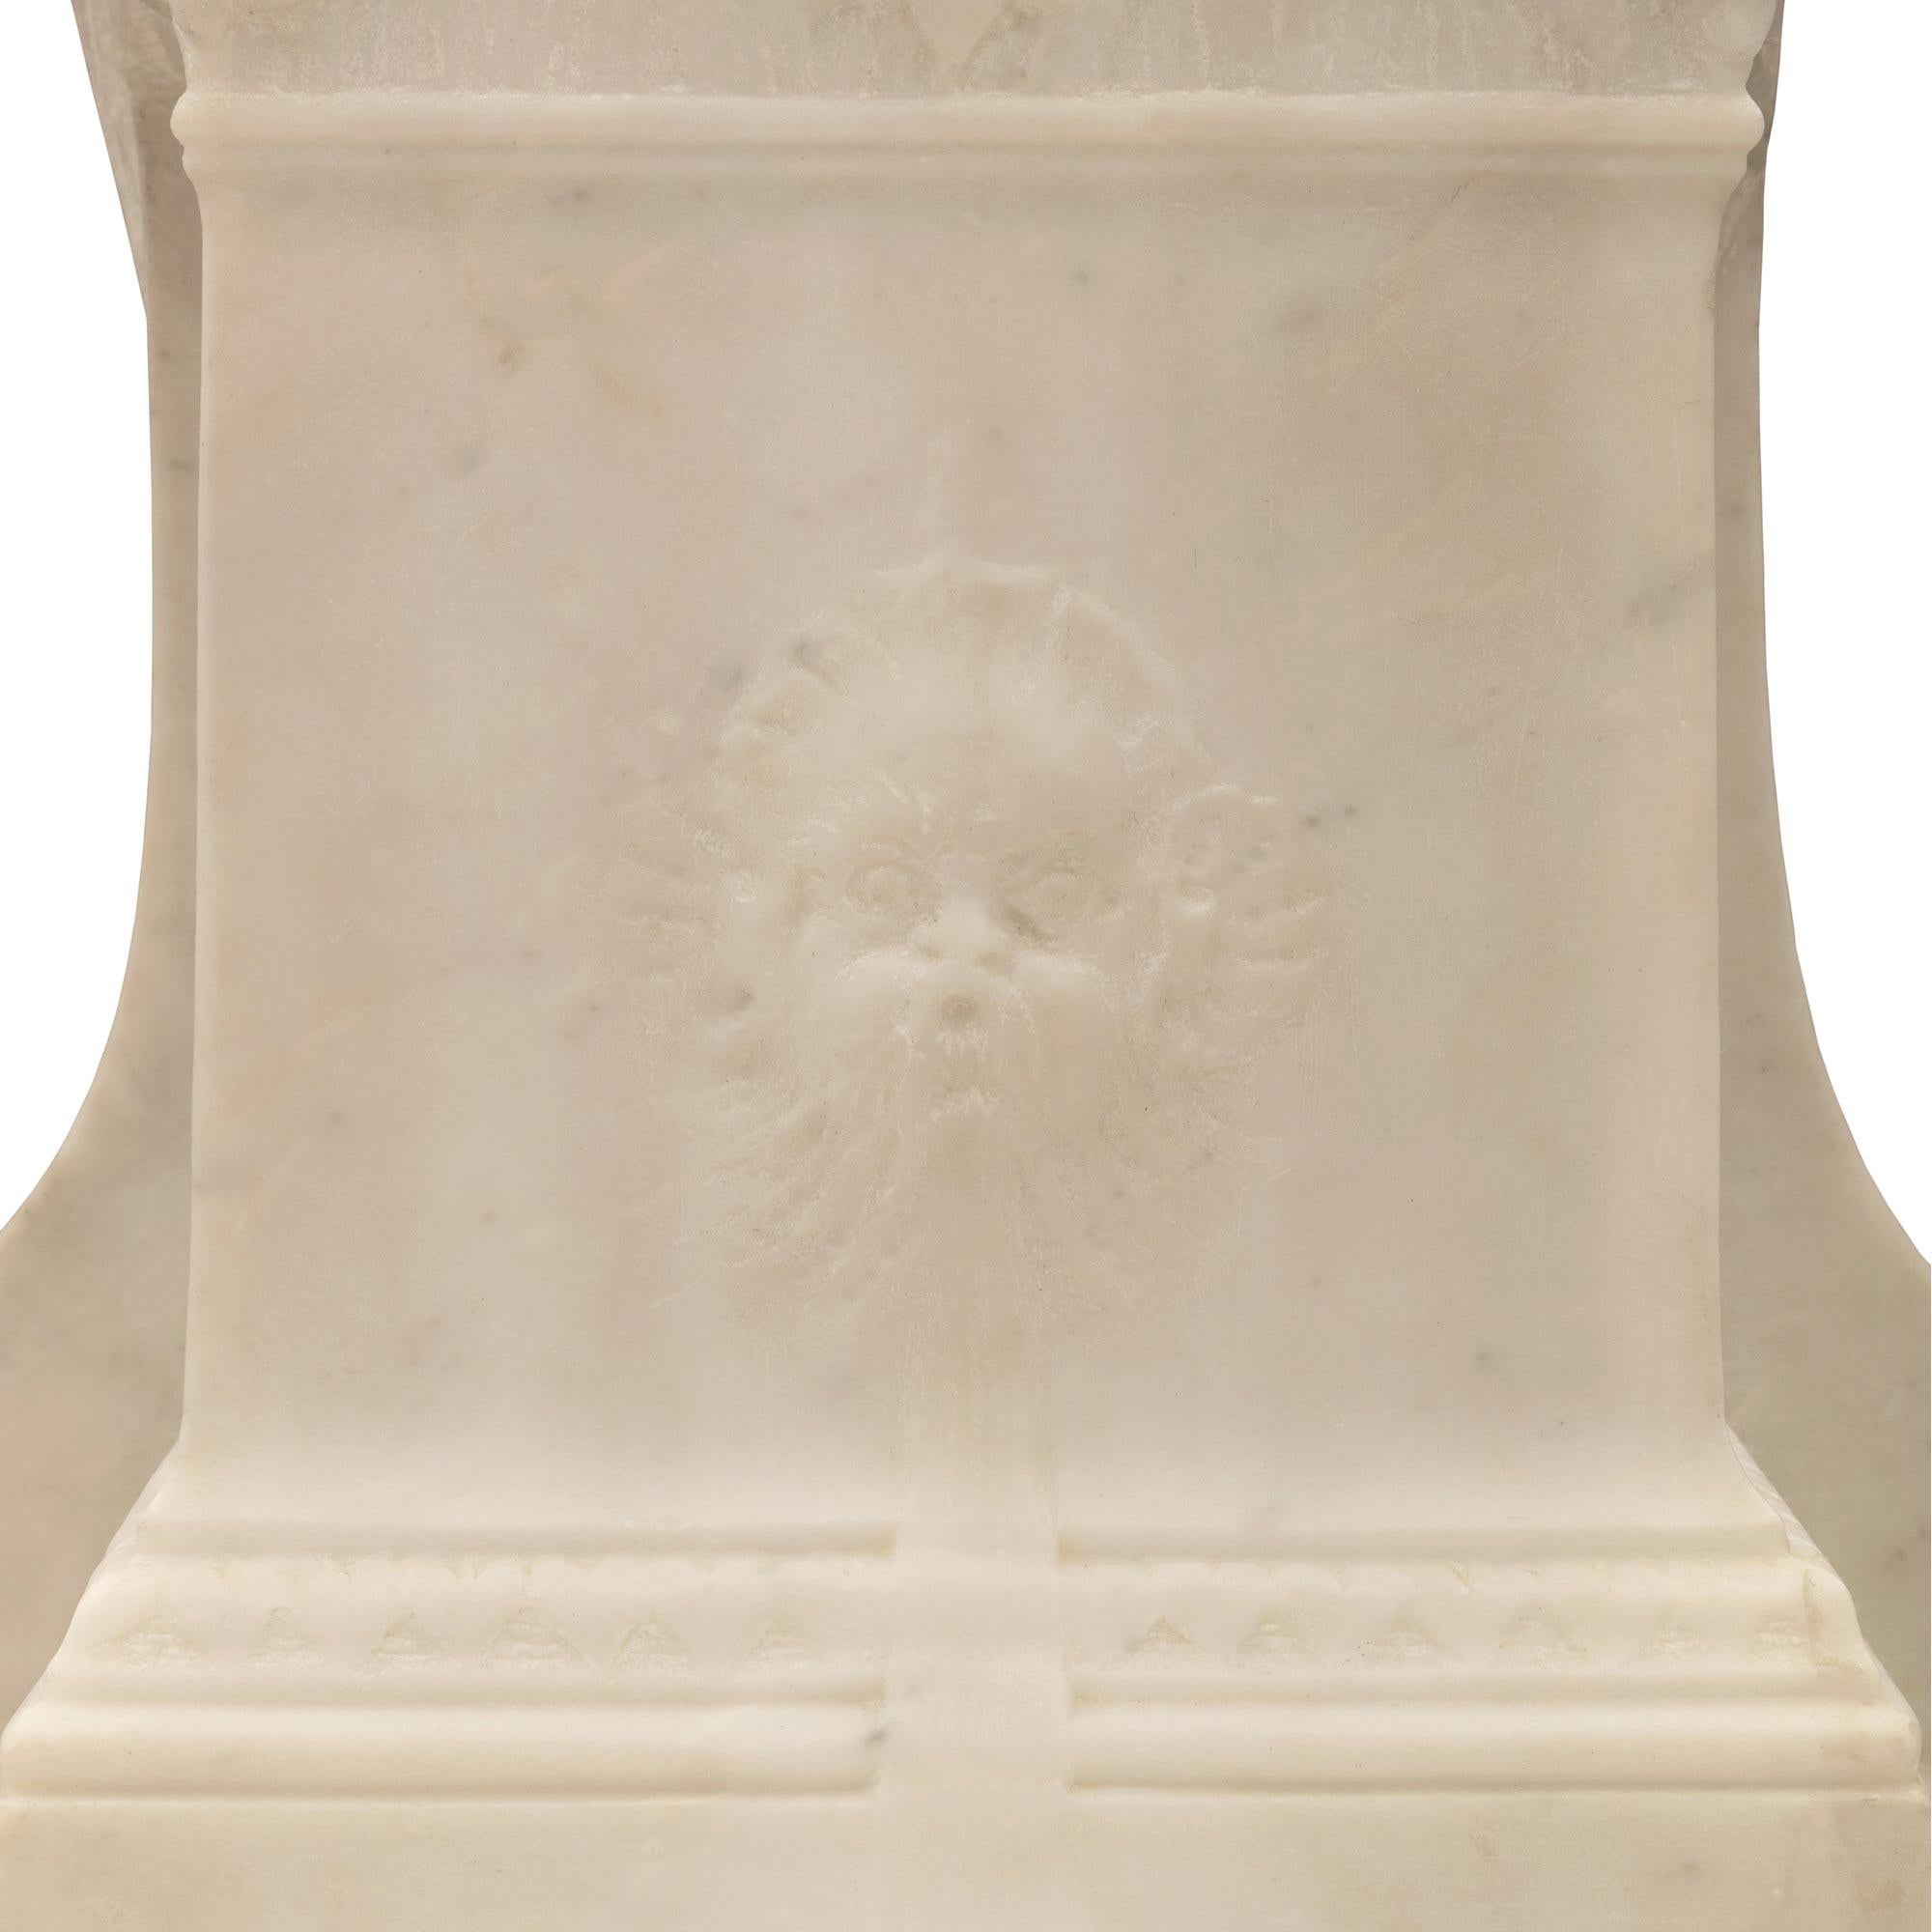 French 19th Century Solid White Carrara Marble Statue/Basin For Sale 7